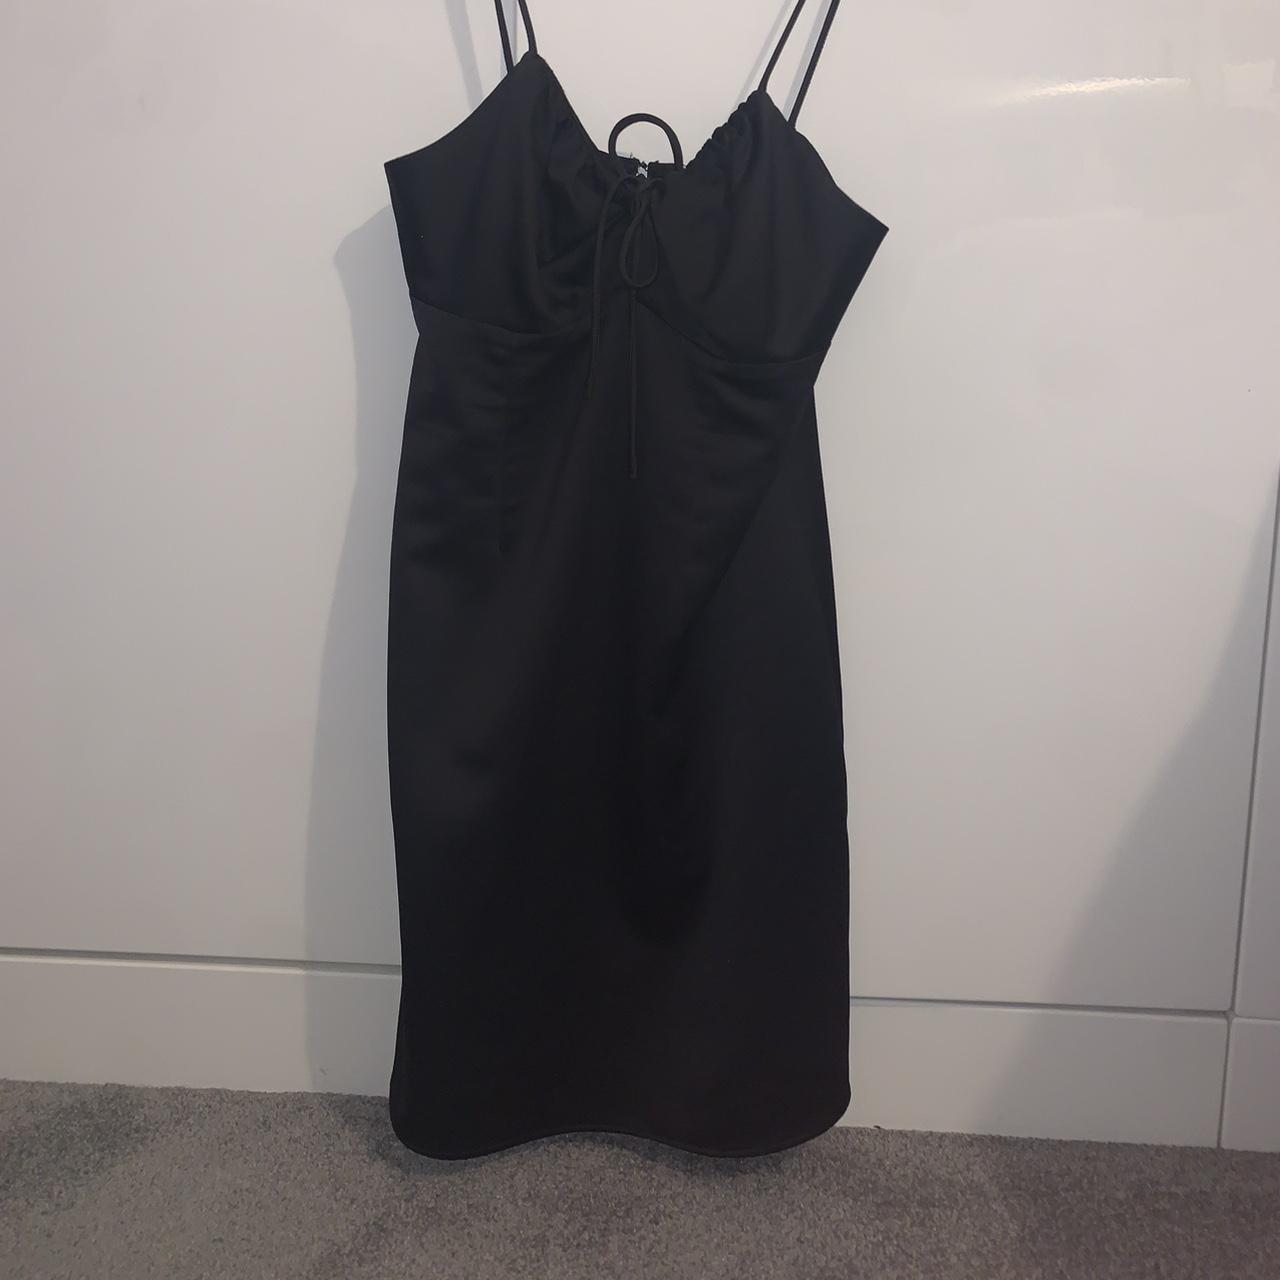 Black satin mini dress Tie up at the front Great... - Depop